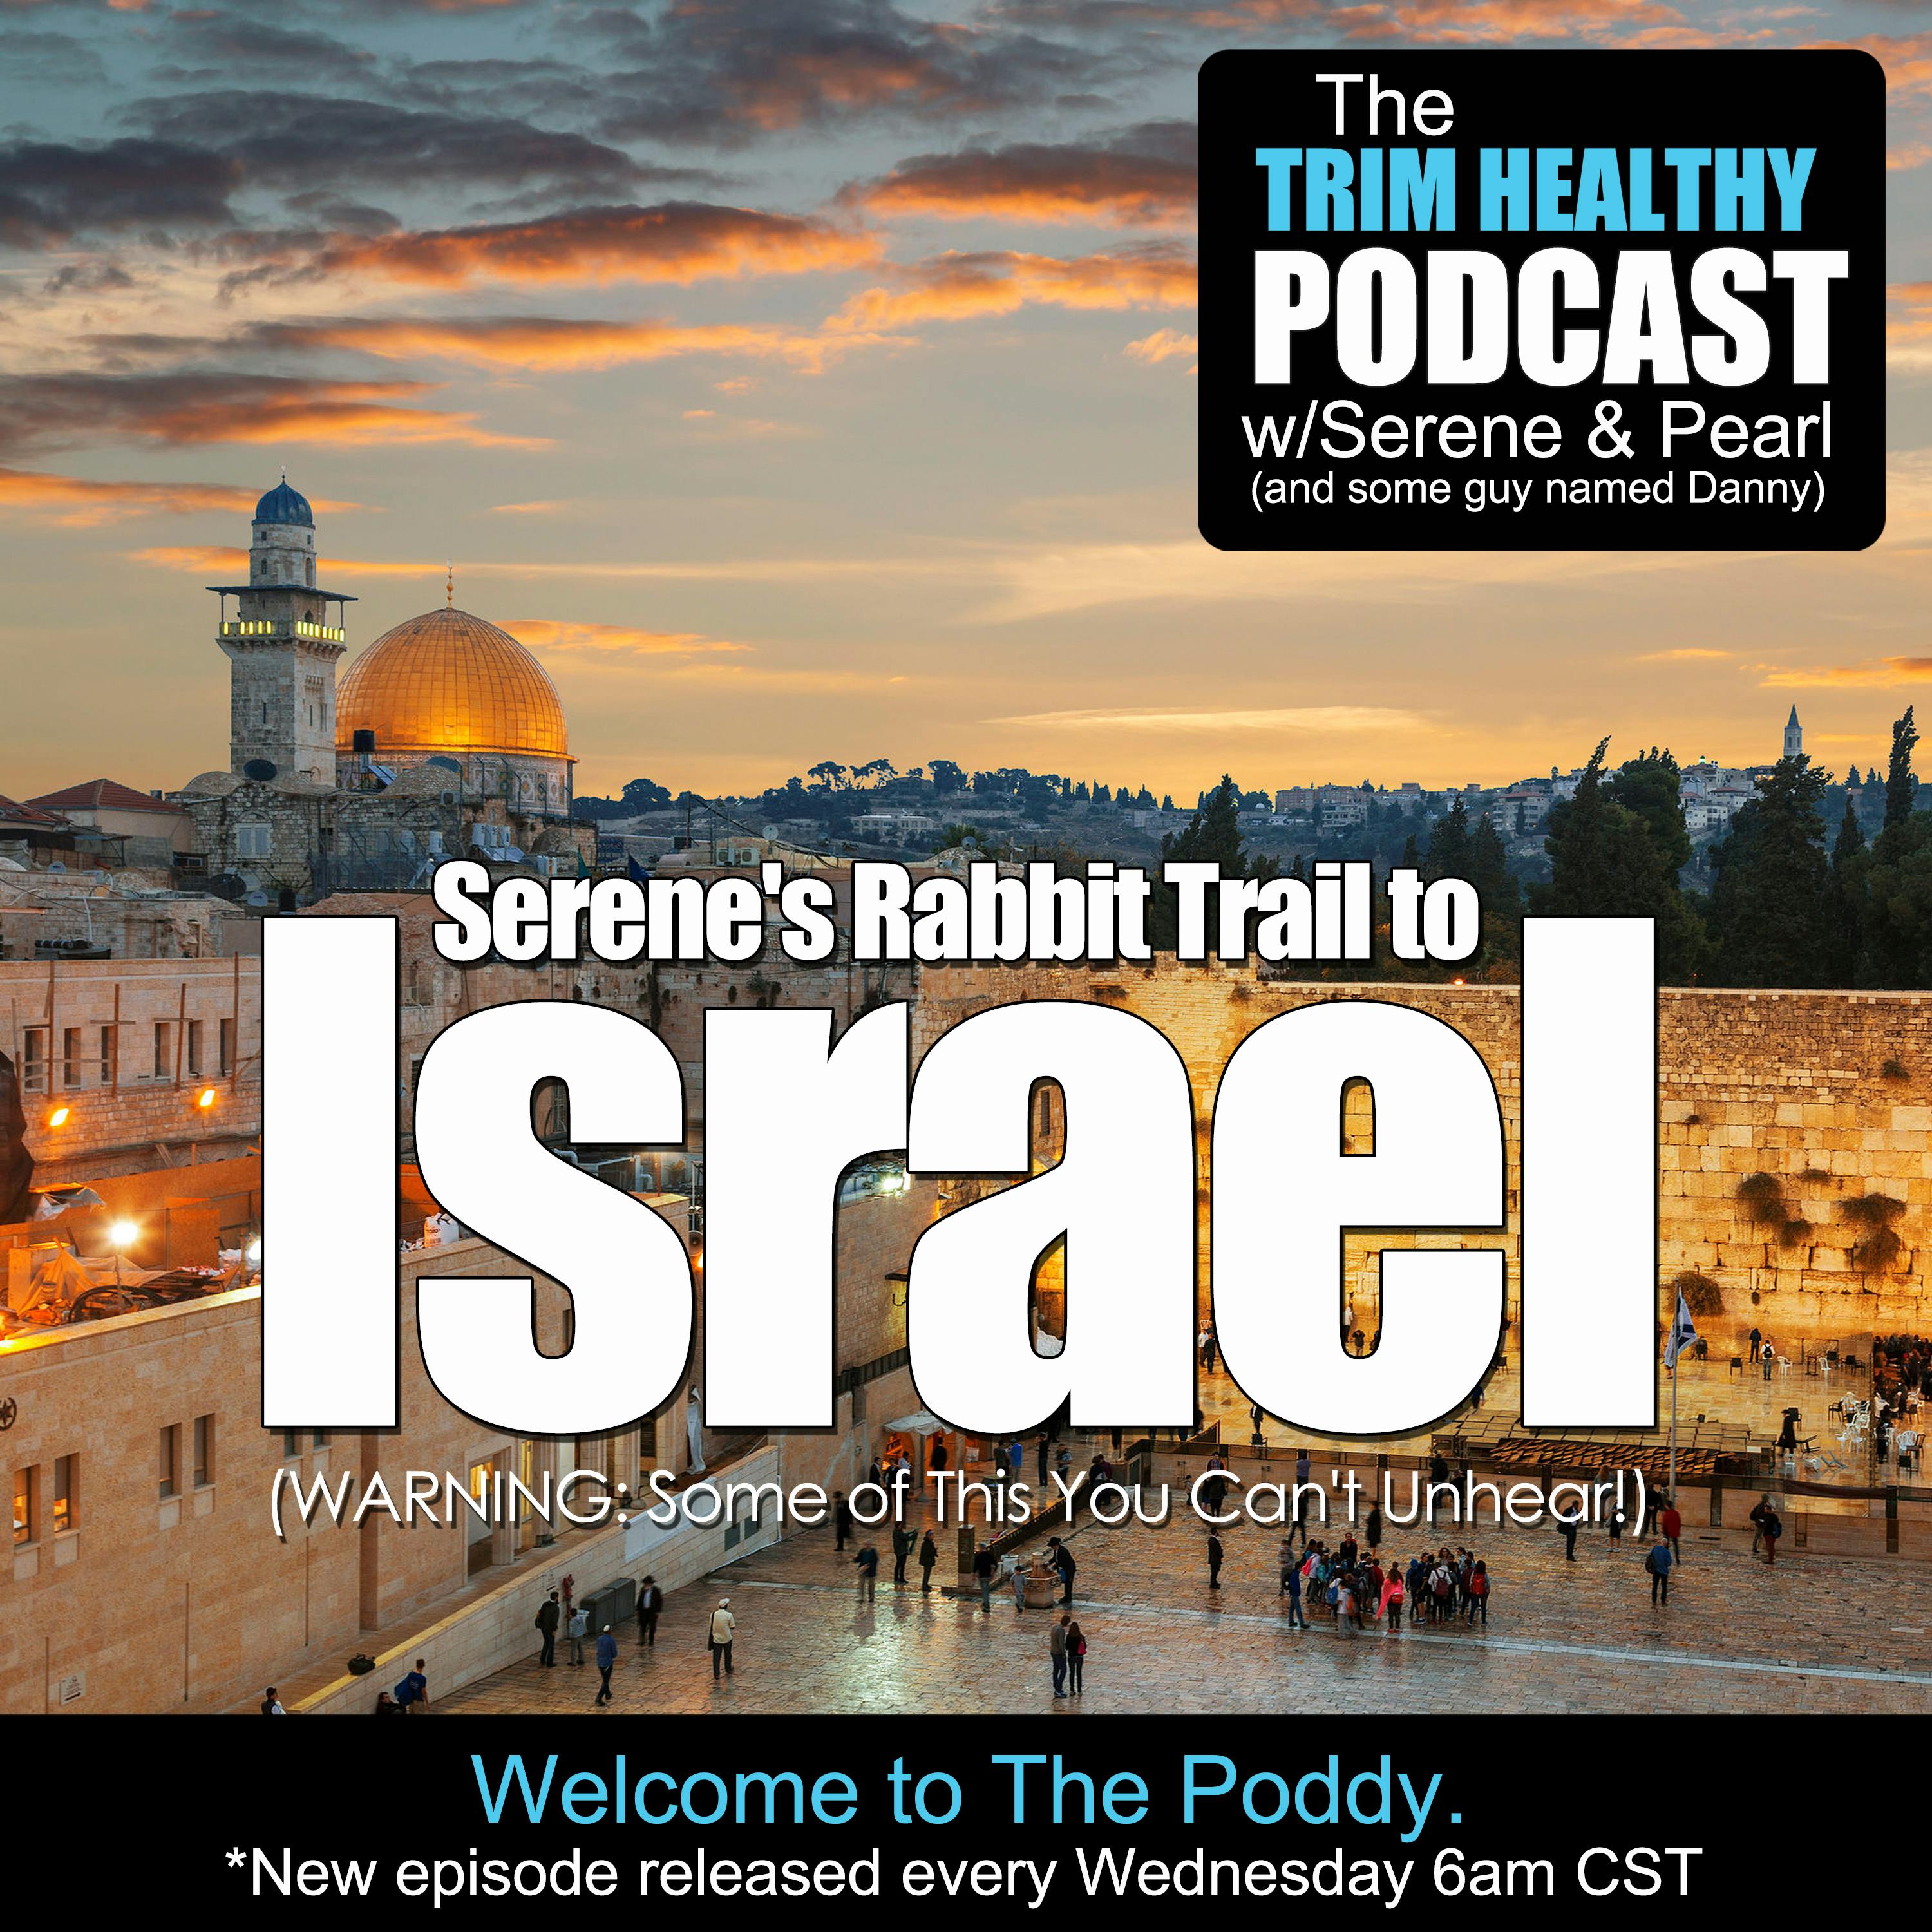 Ep 158: Serene's Rabbit Trail to Israel. (WARNING: Some of This You Can't Unhear!)